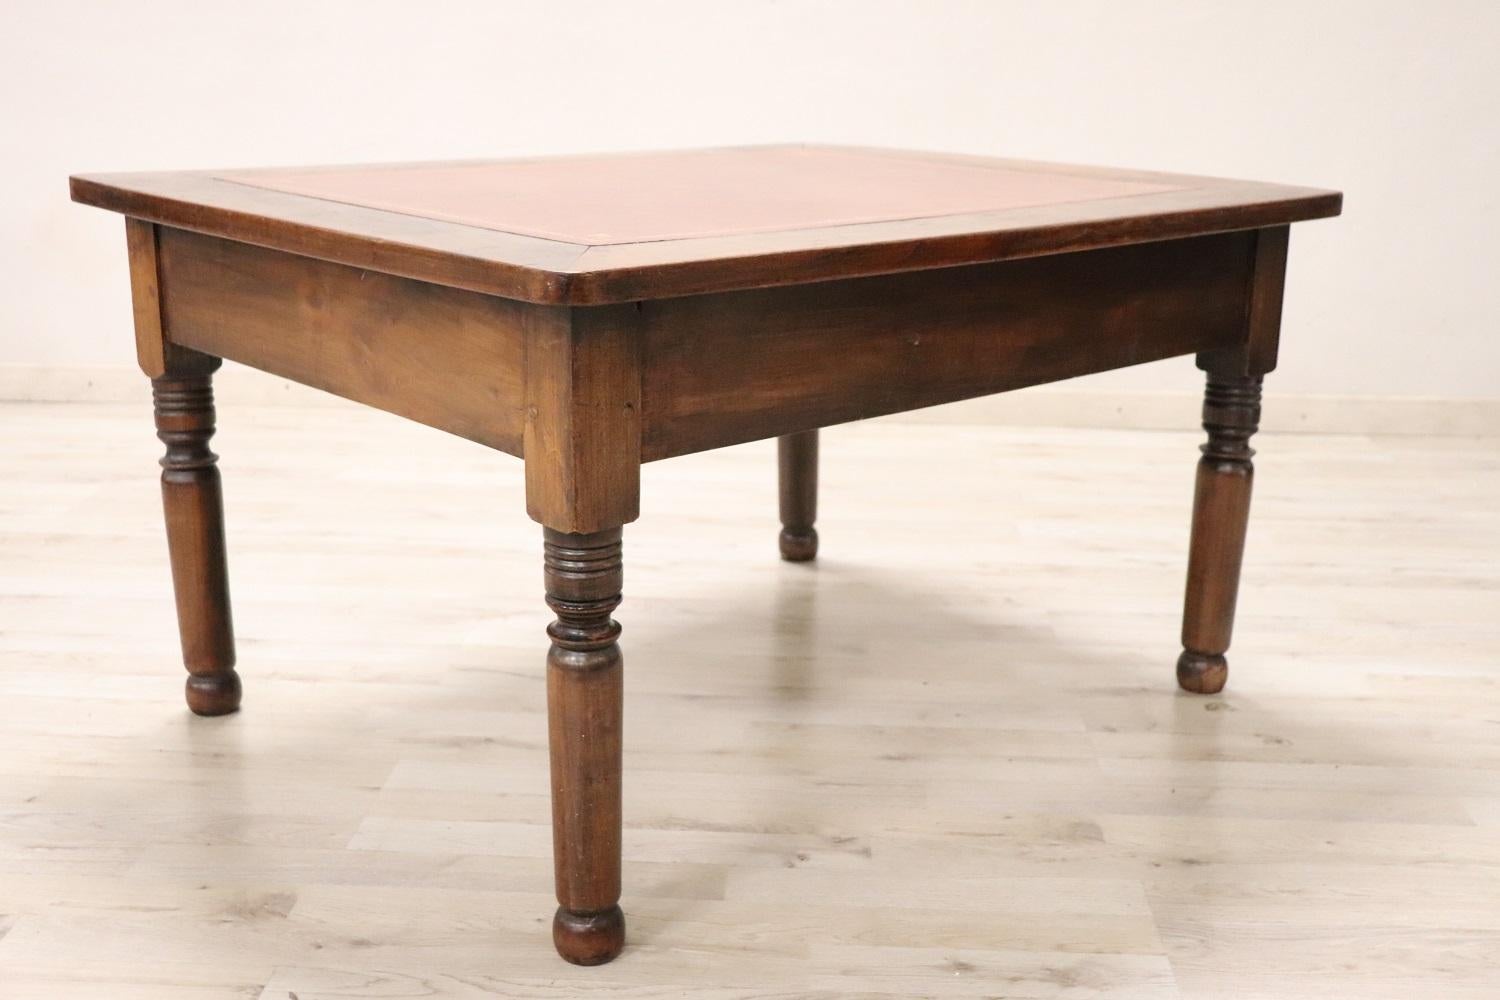 Faux Leather 19th Centuy Italian Antique Large Sofa Table or Coffee Table in Cherry Wood